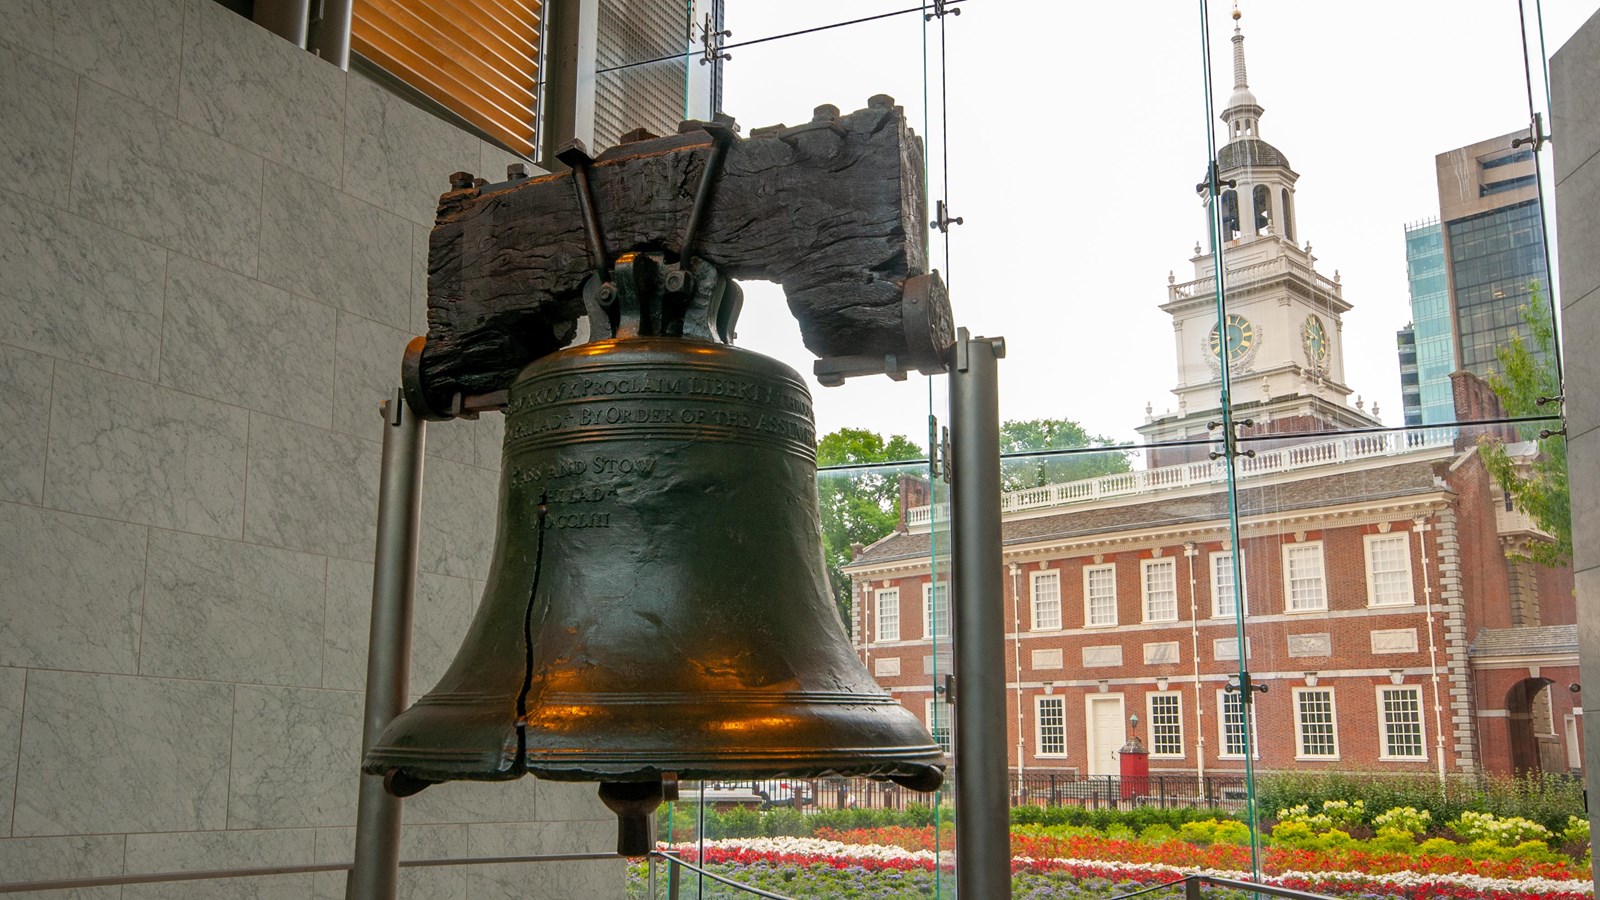 The Liberty Bell suspended on two posts, with Independence Hall in the background.